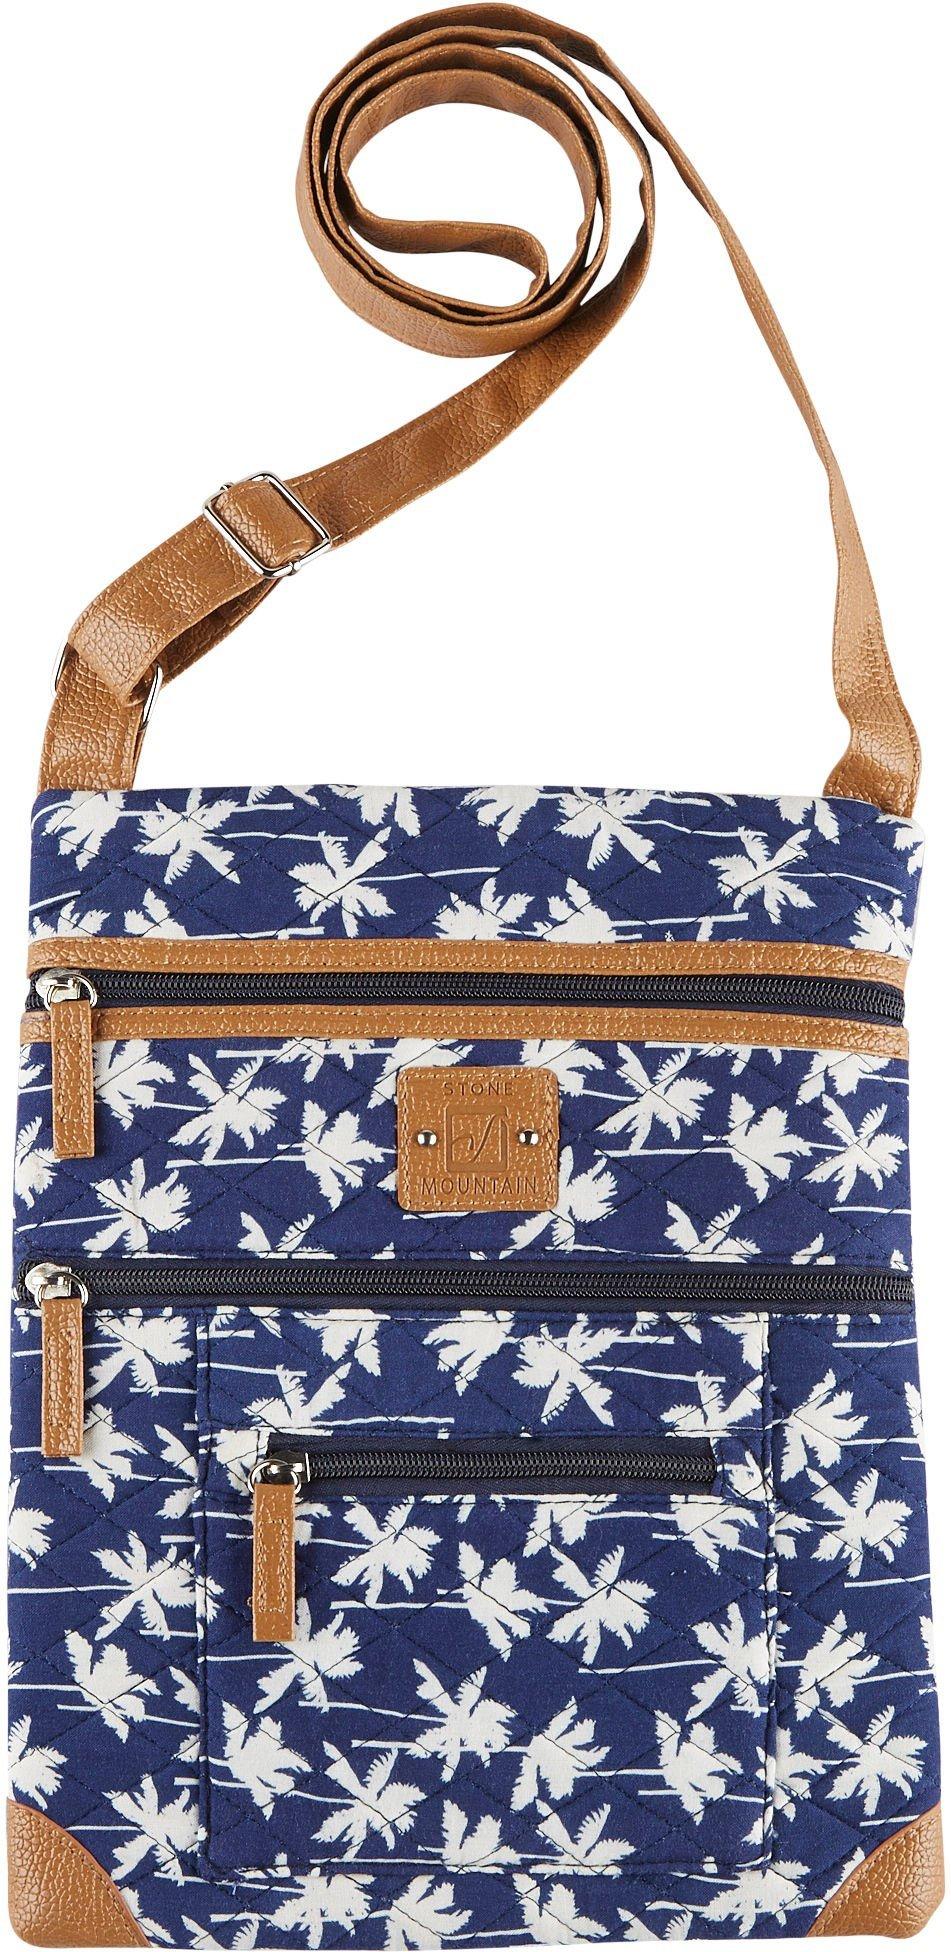 Stone Mountain Handbags Company Store  FLORAL LARGE DOME SATCHEL W/BONDED  LEATHER PERFORATED TRIM